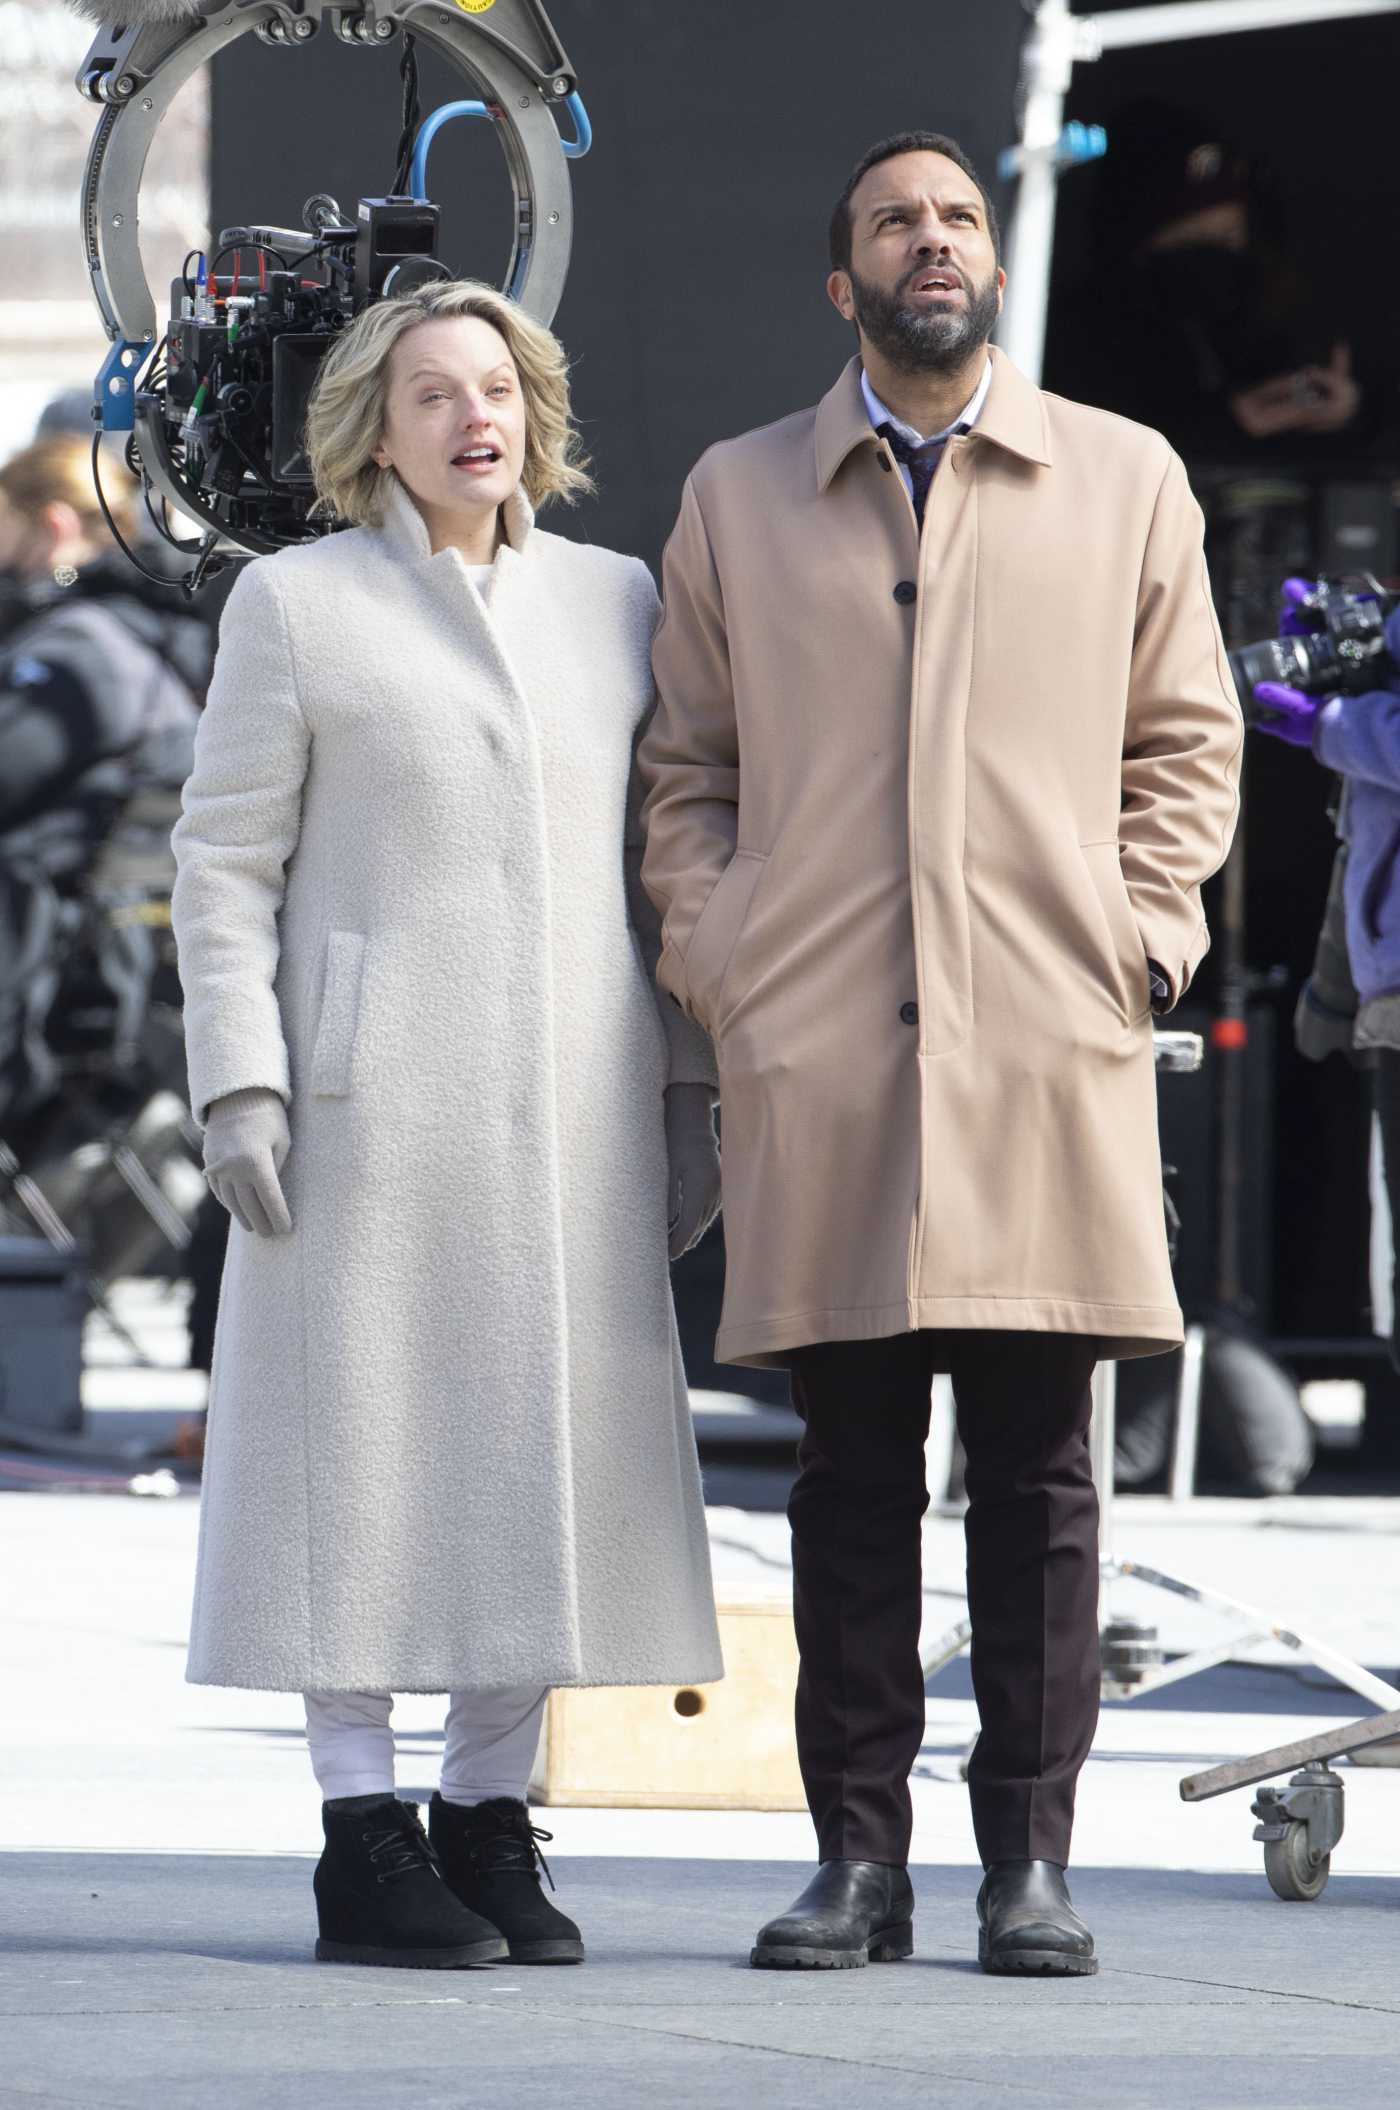 Elisabeth Moss in a White Coat on the Set of Handmaid's Tale with Co-Star O-T Fagbenle in Toronto 03/29/2022